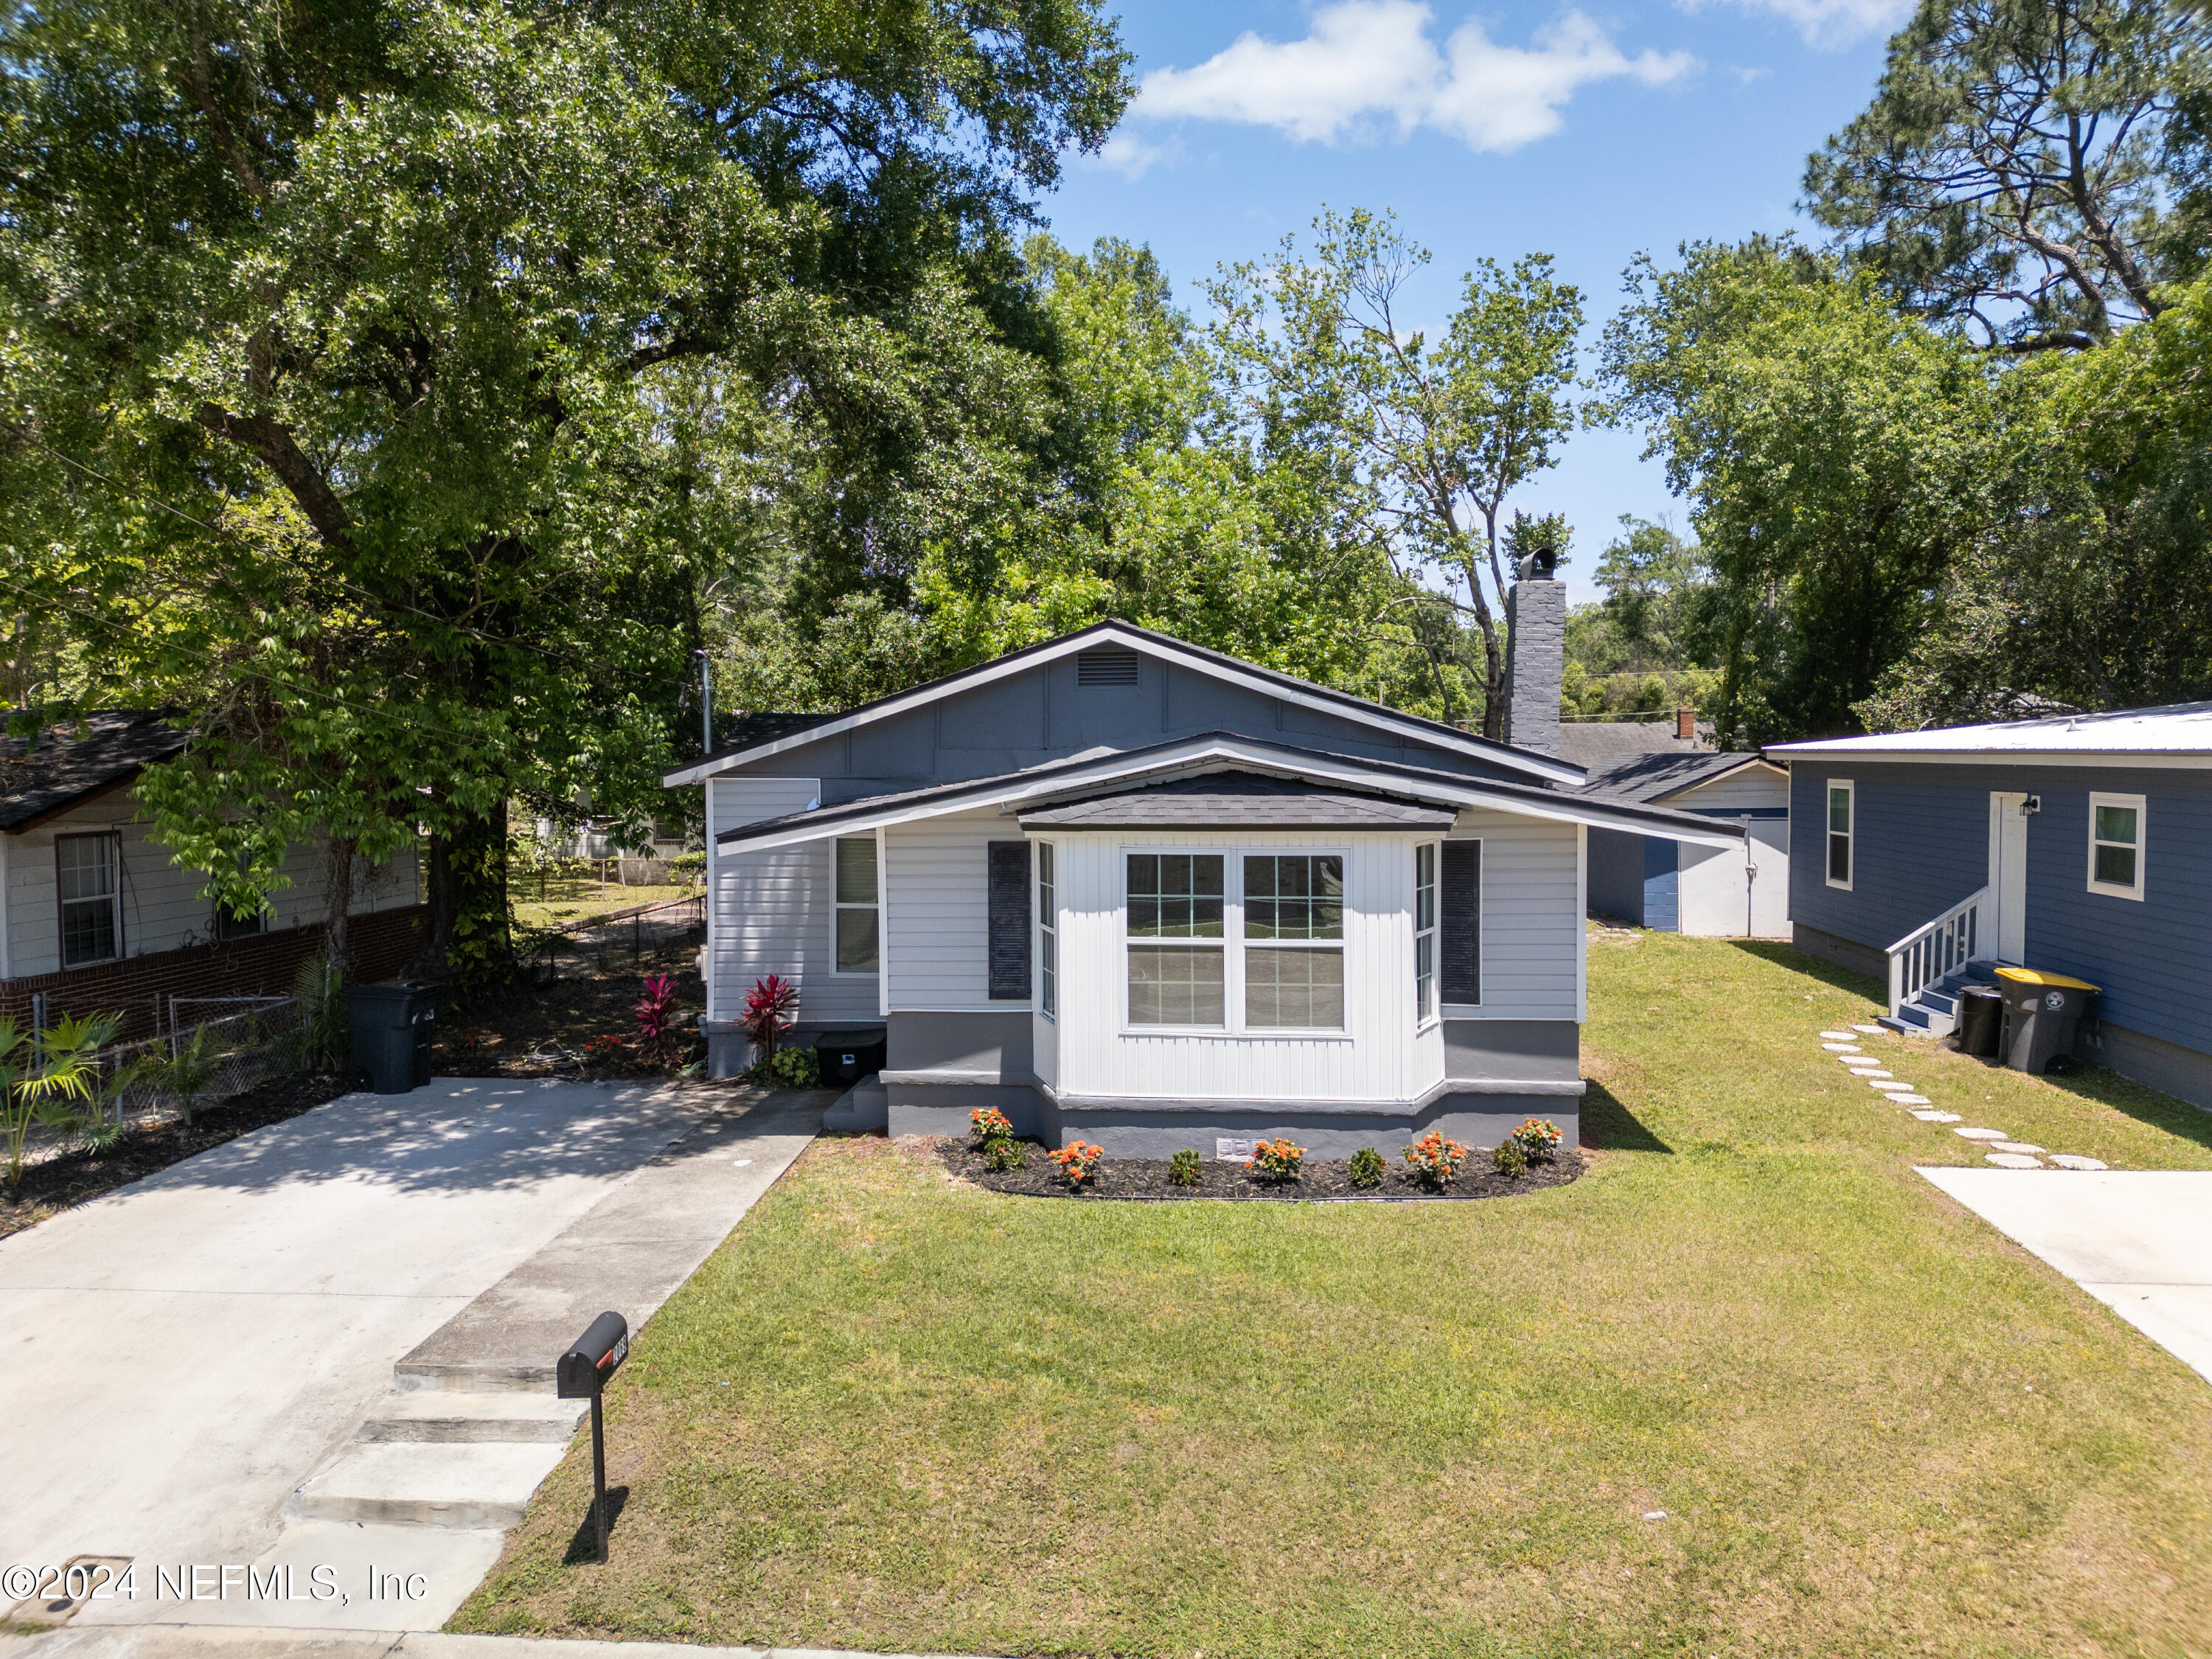 Jacksonville, FL home for sale located at 2069 W 14th Street, Jacksonville, FL 32209